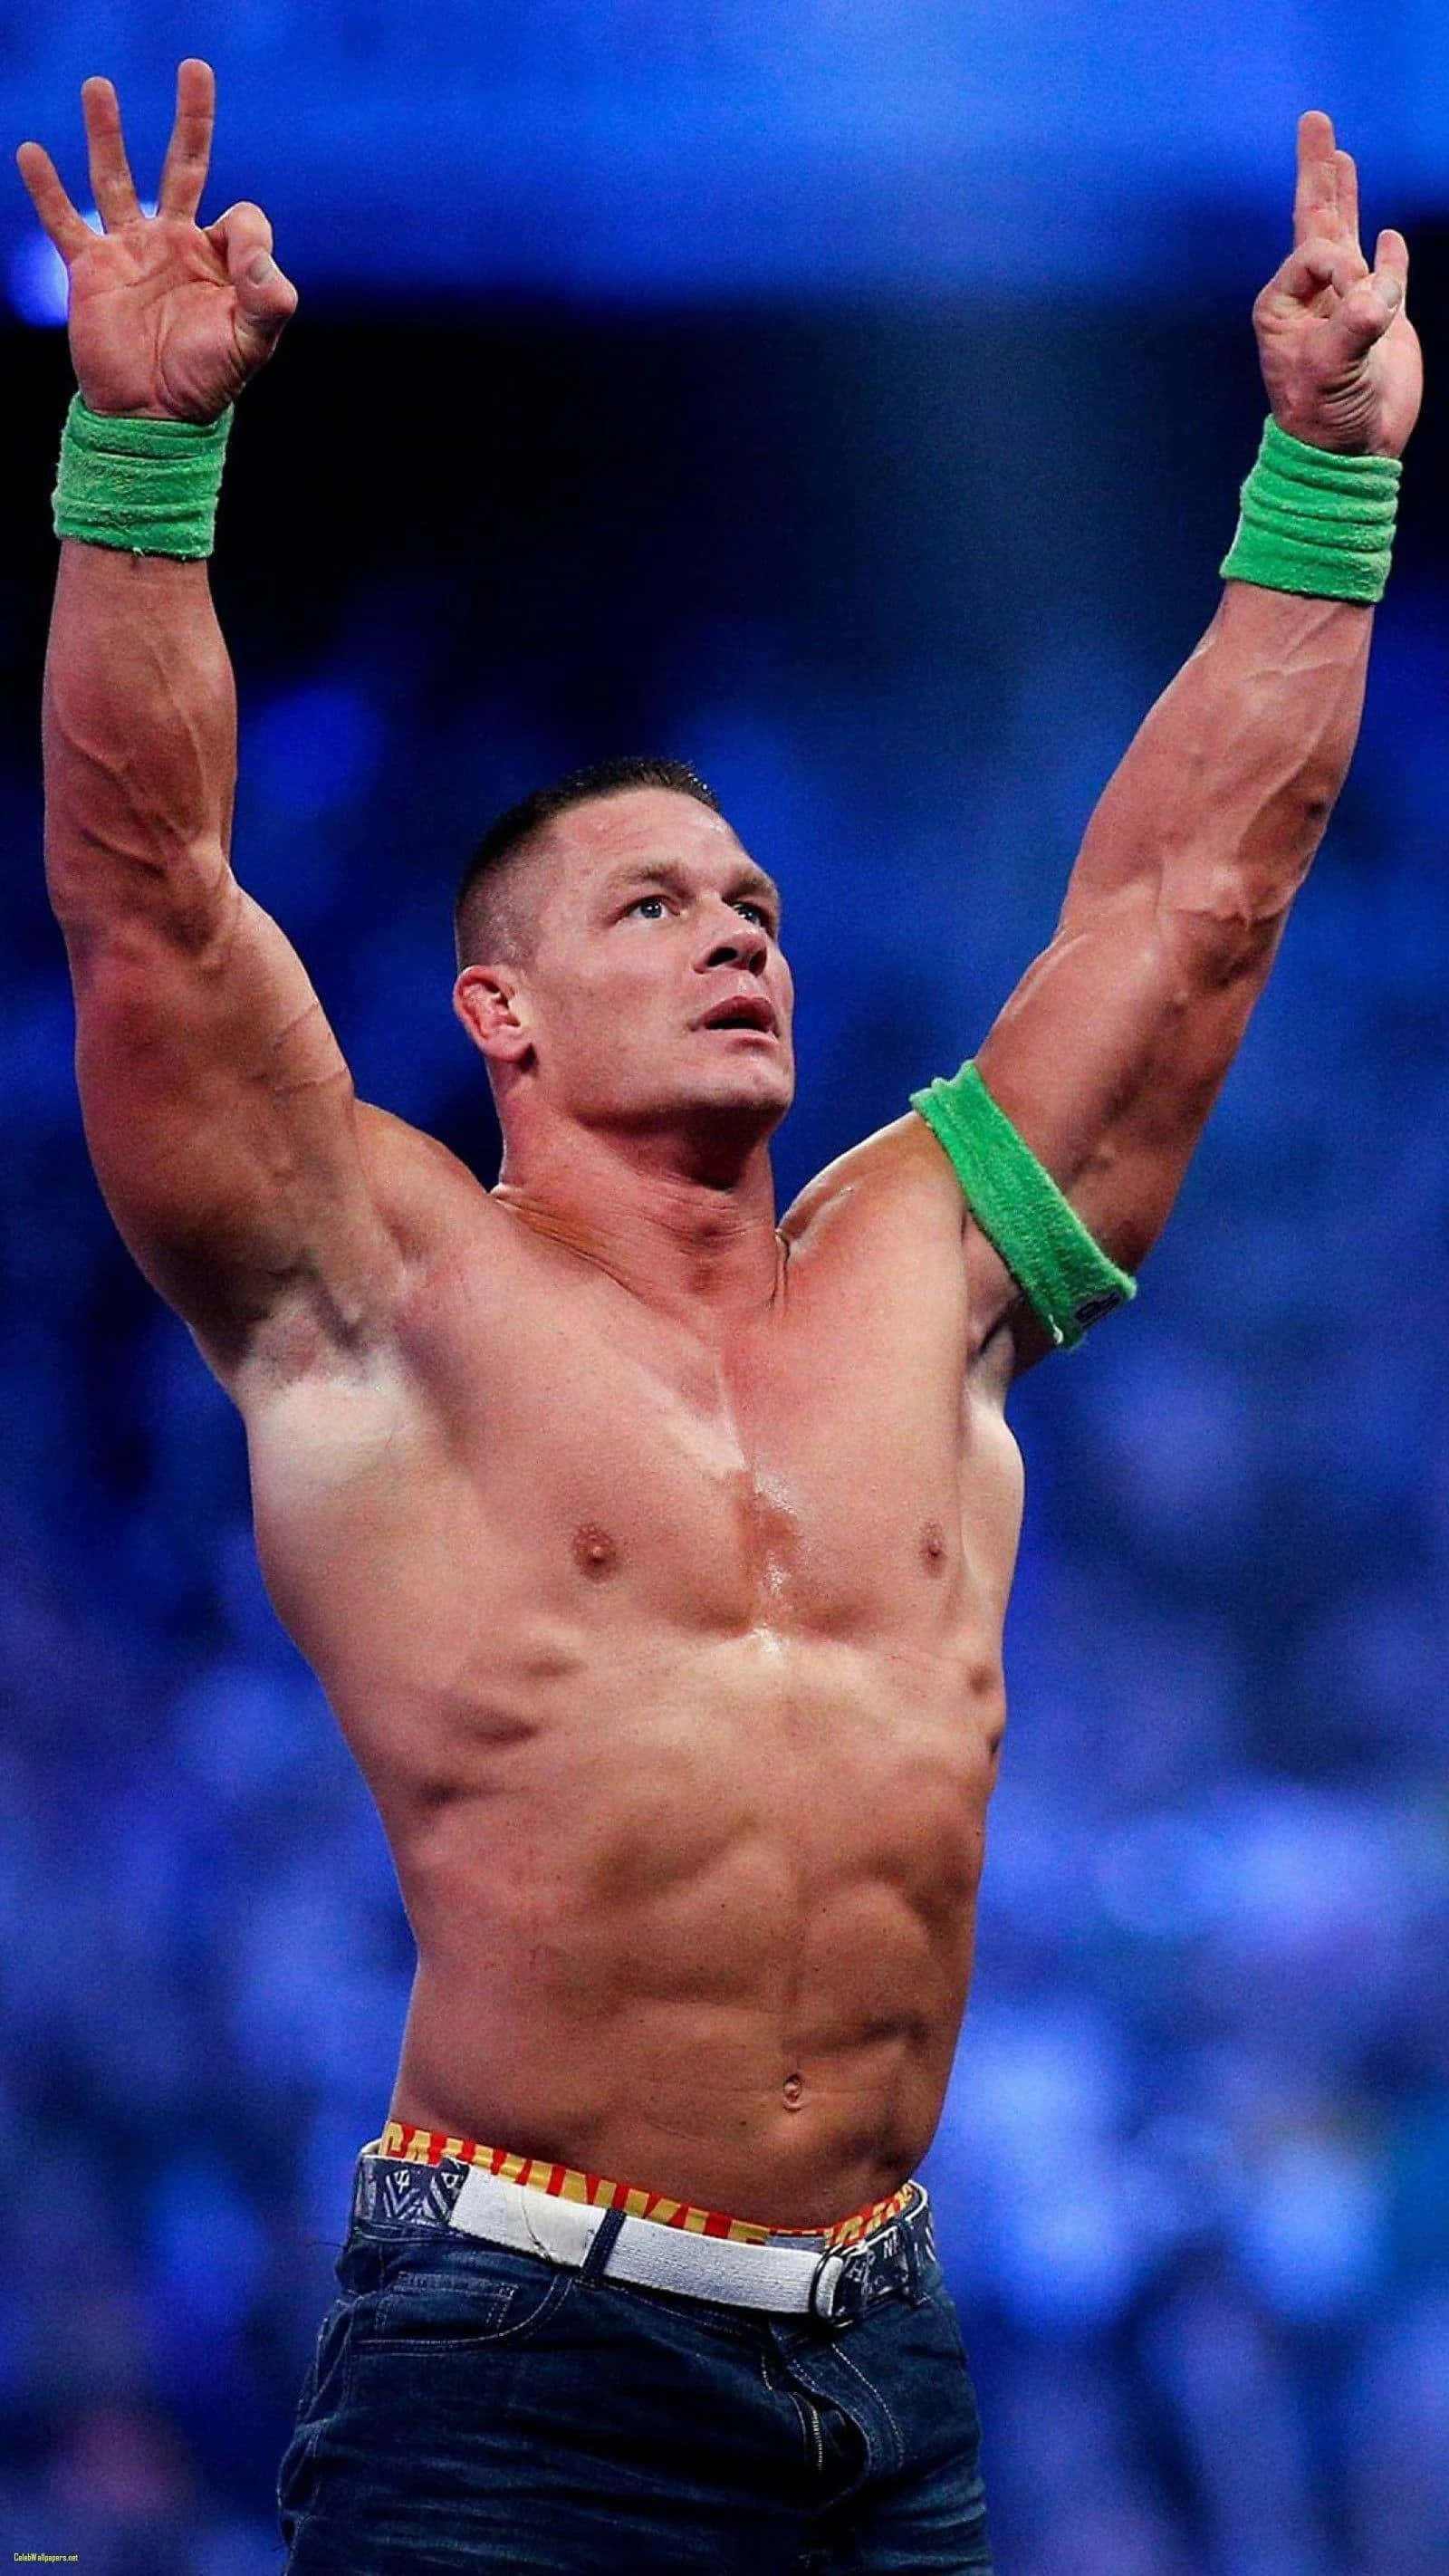 Caption: John Cena - Strength and Determination Personified